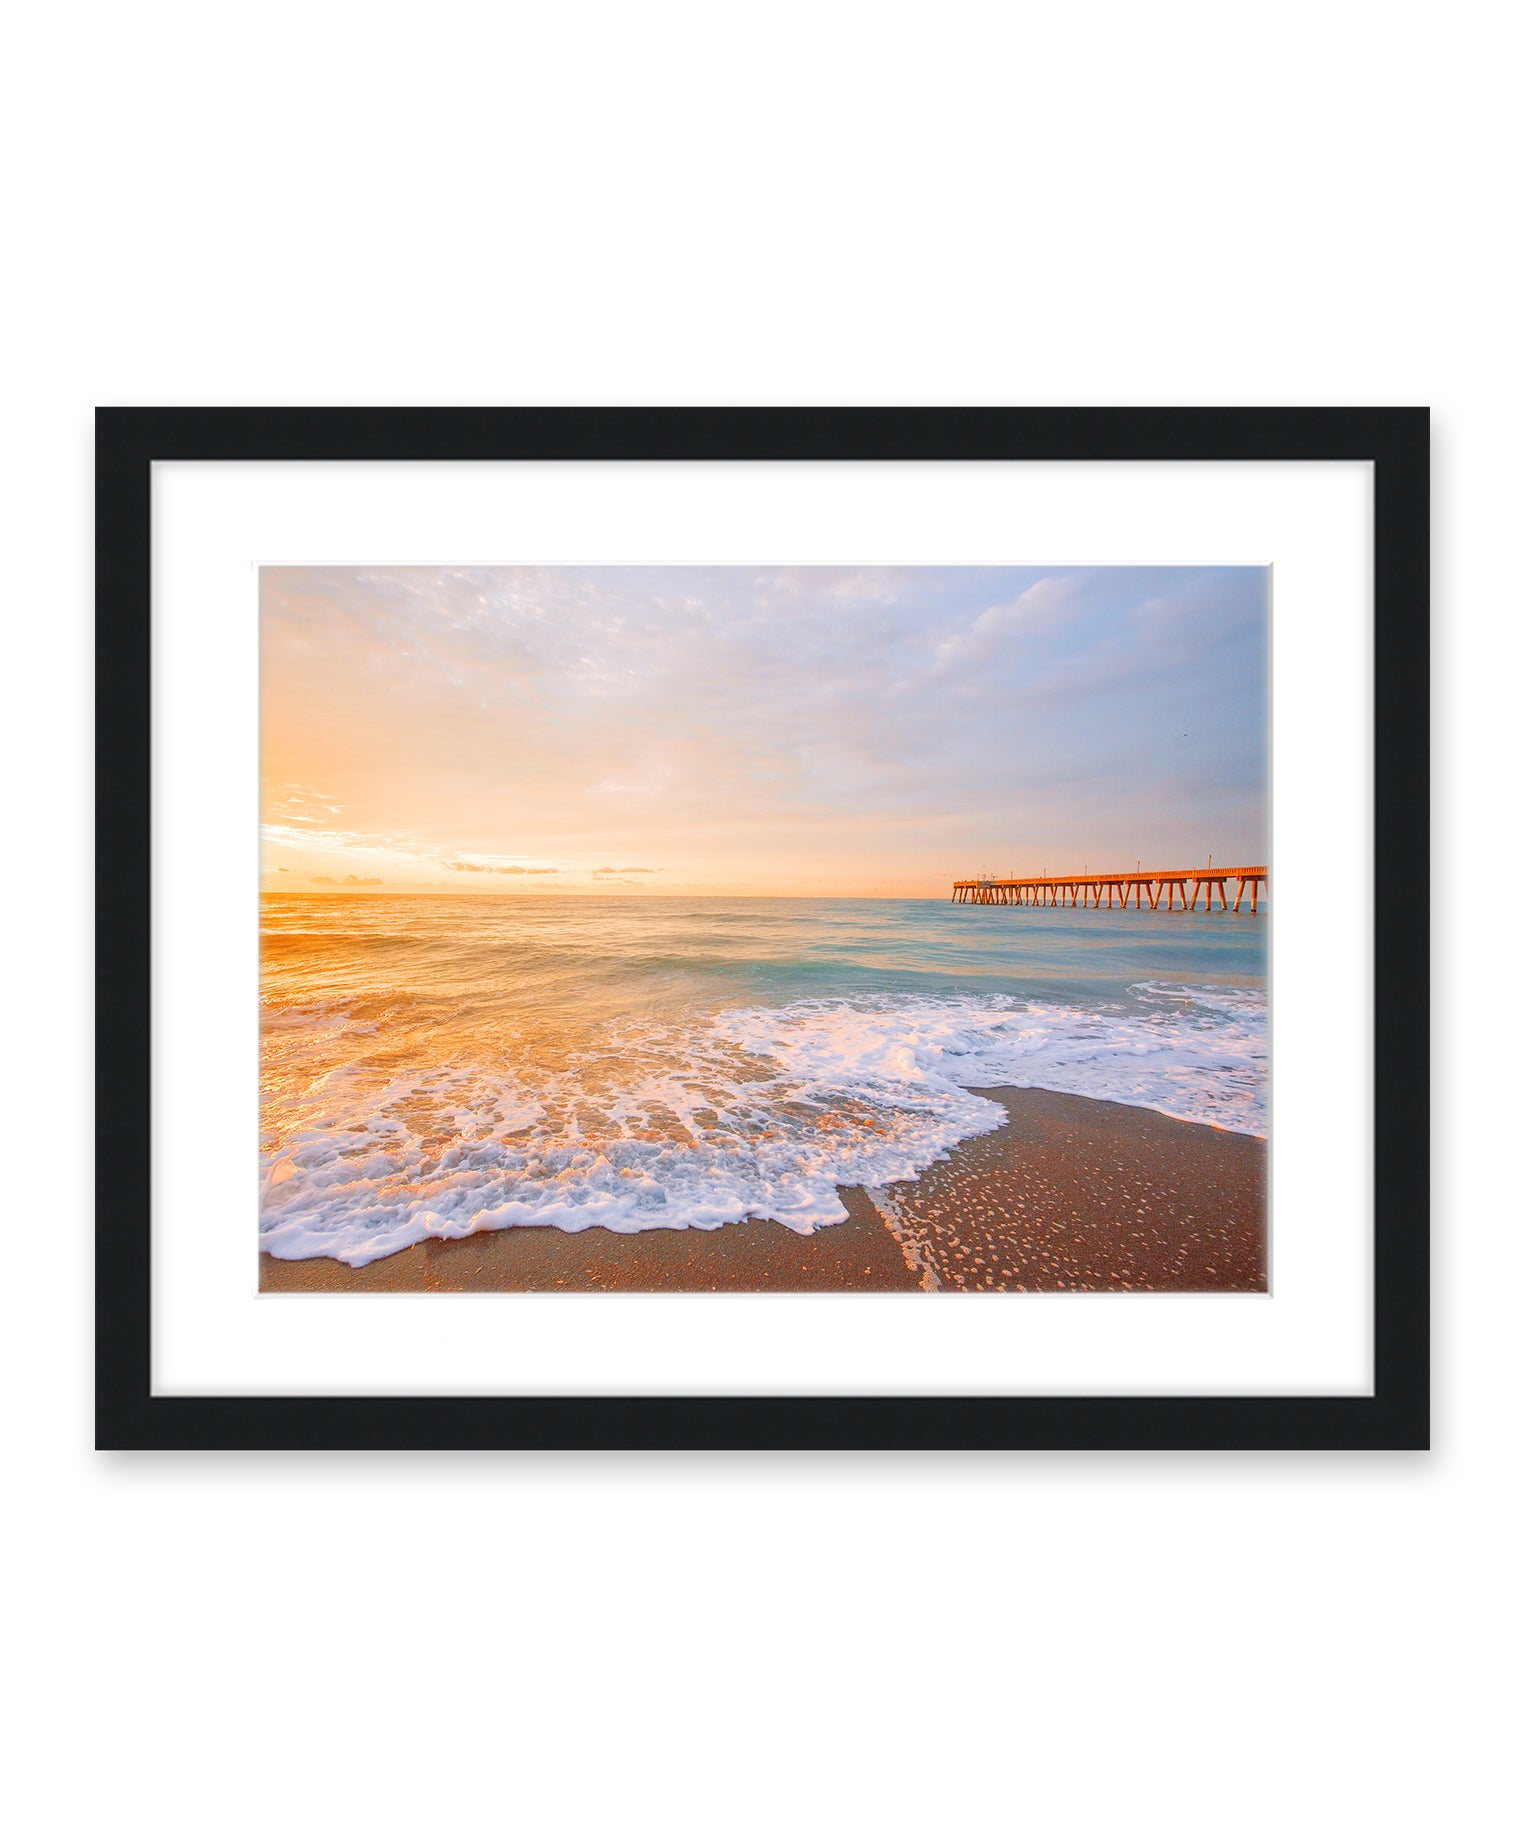 Sunny Colorful Sunrise Wrightsville Beach Photograph, Black Wood Frame by Wright and Roam